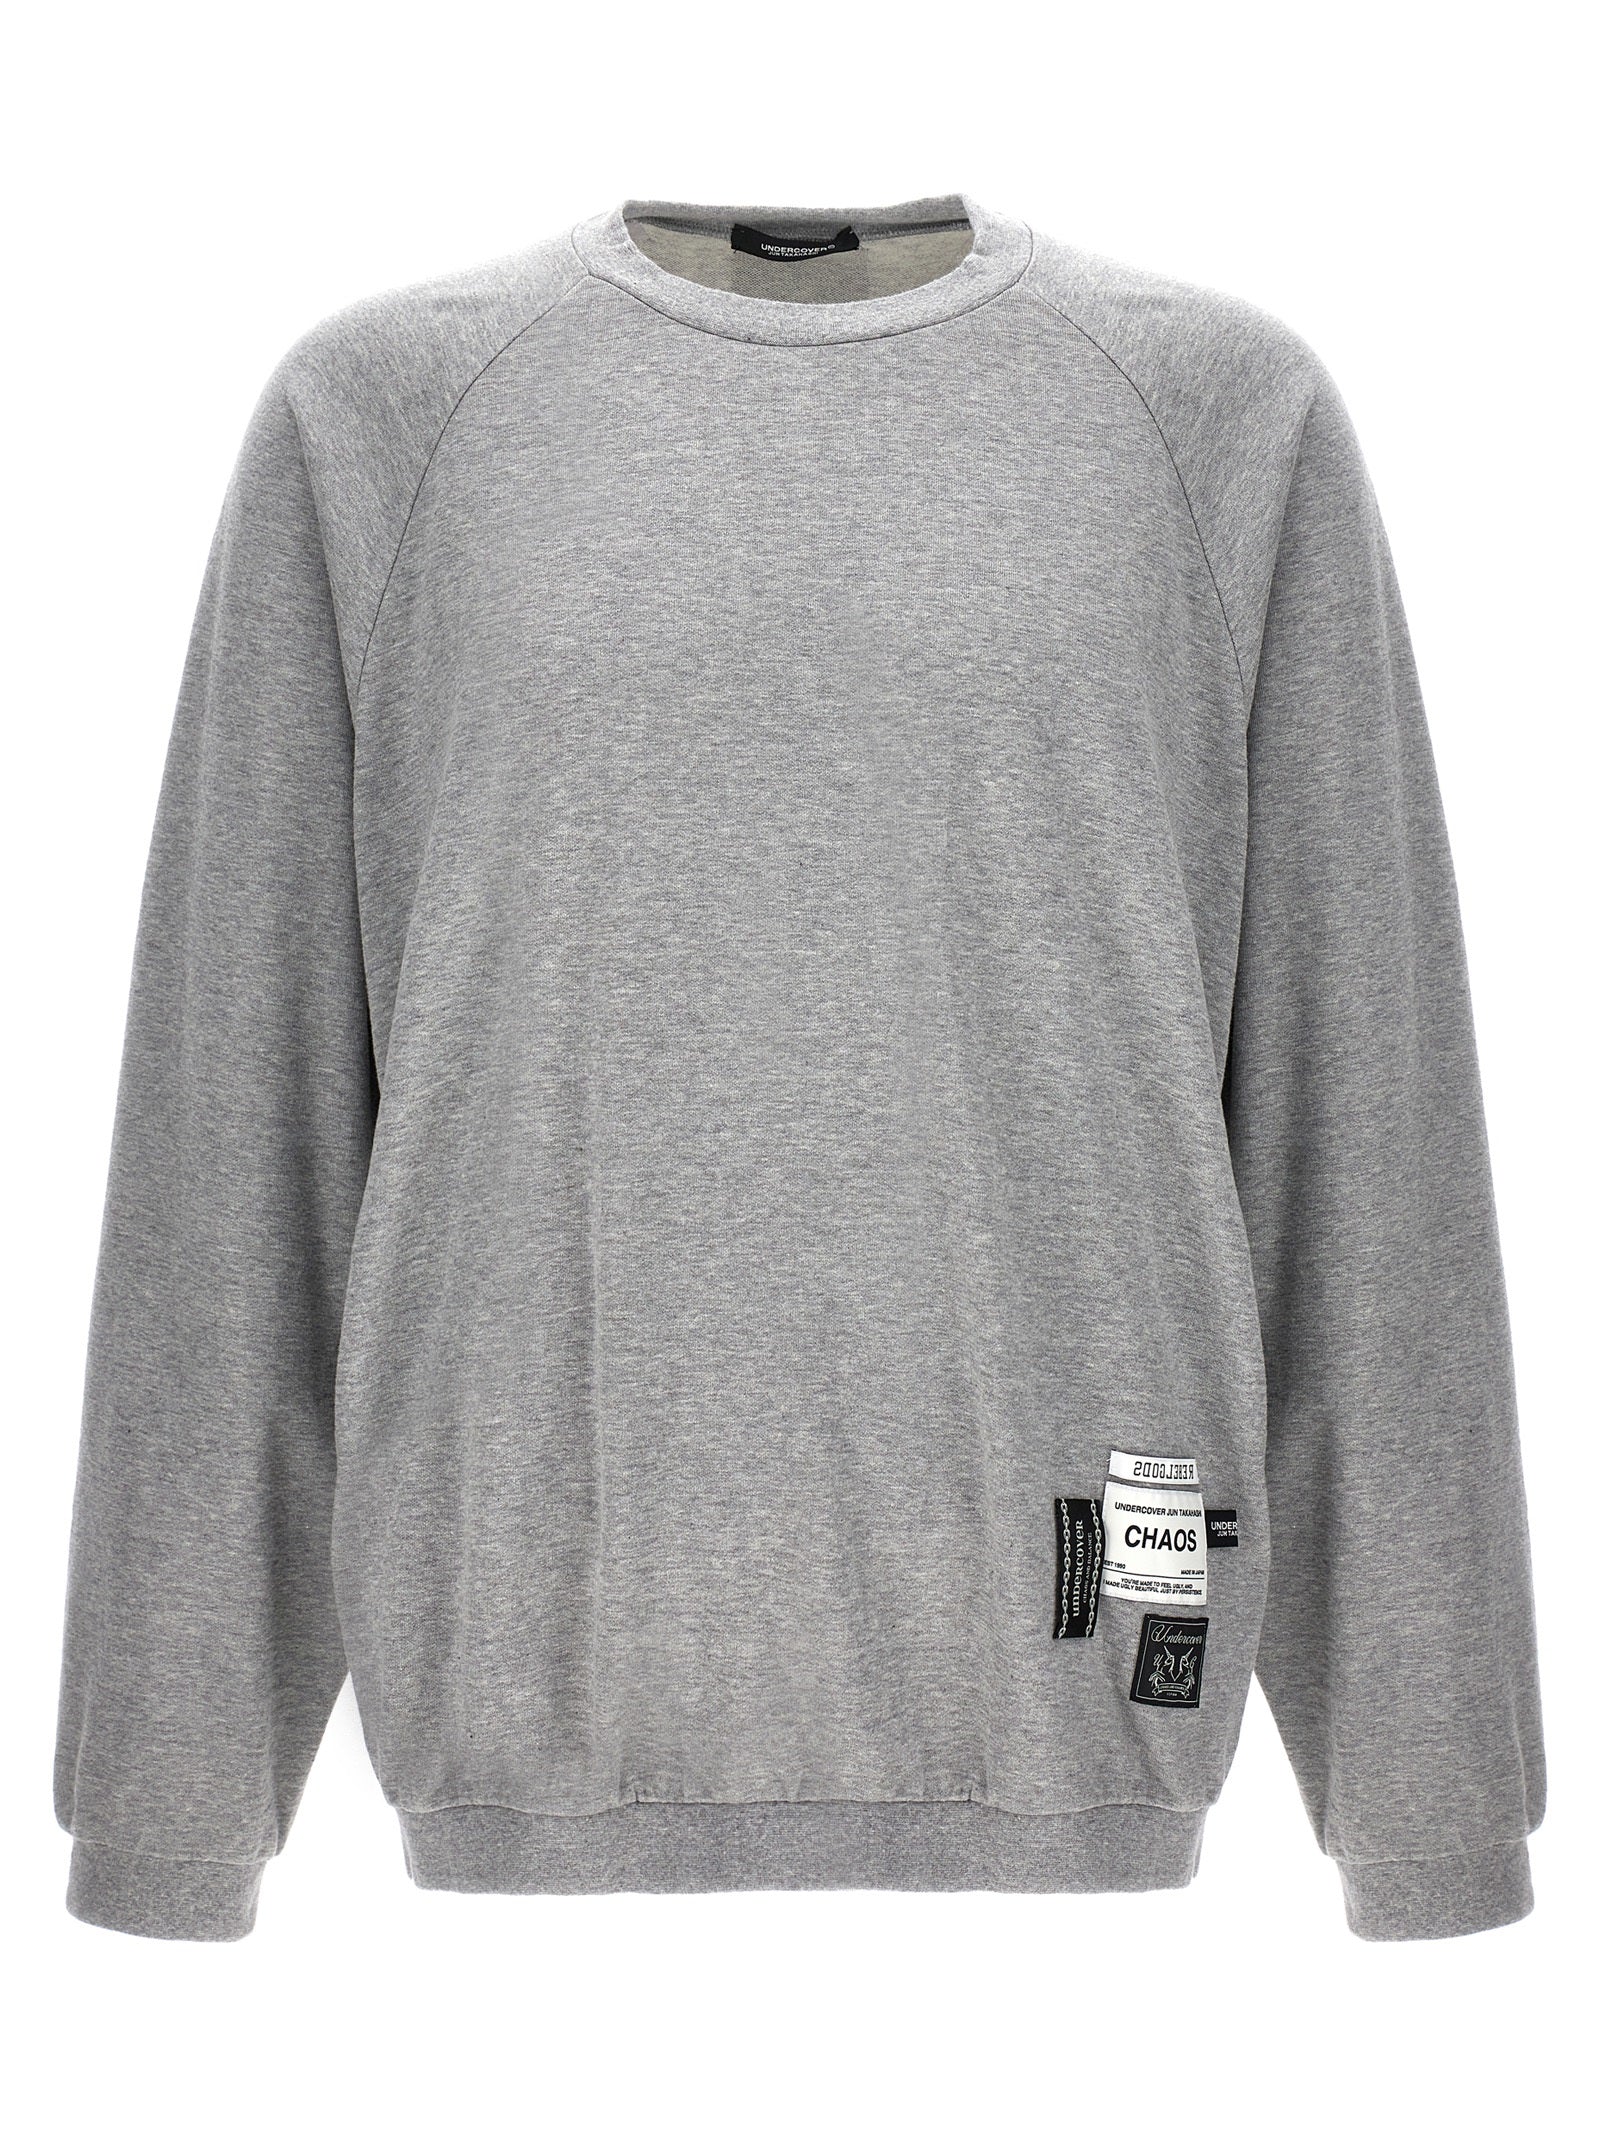 UNDERCOVER 'CHAOS AND BALANCE' SWEATSHIRT UC1D48084TOPGRAY